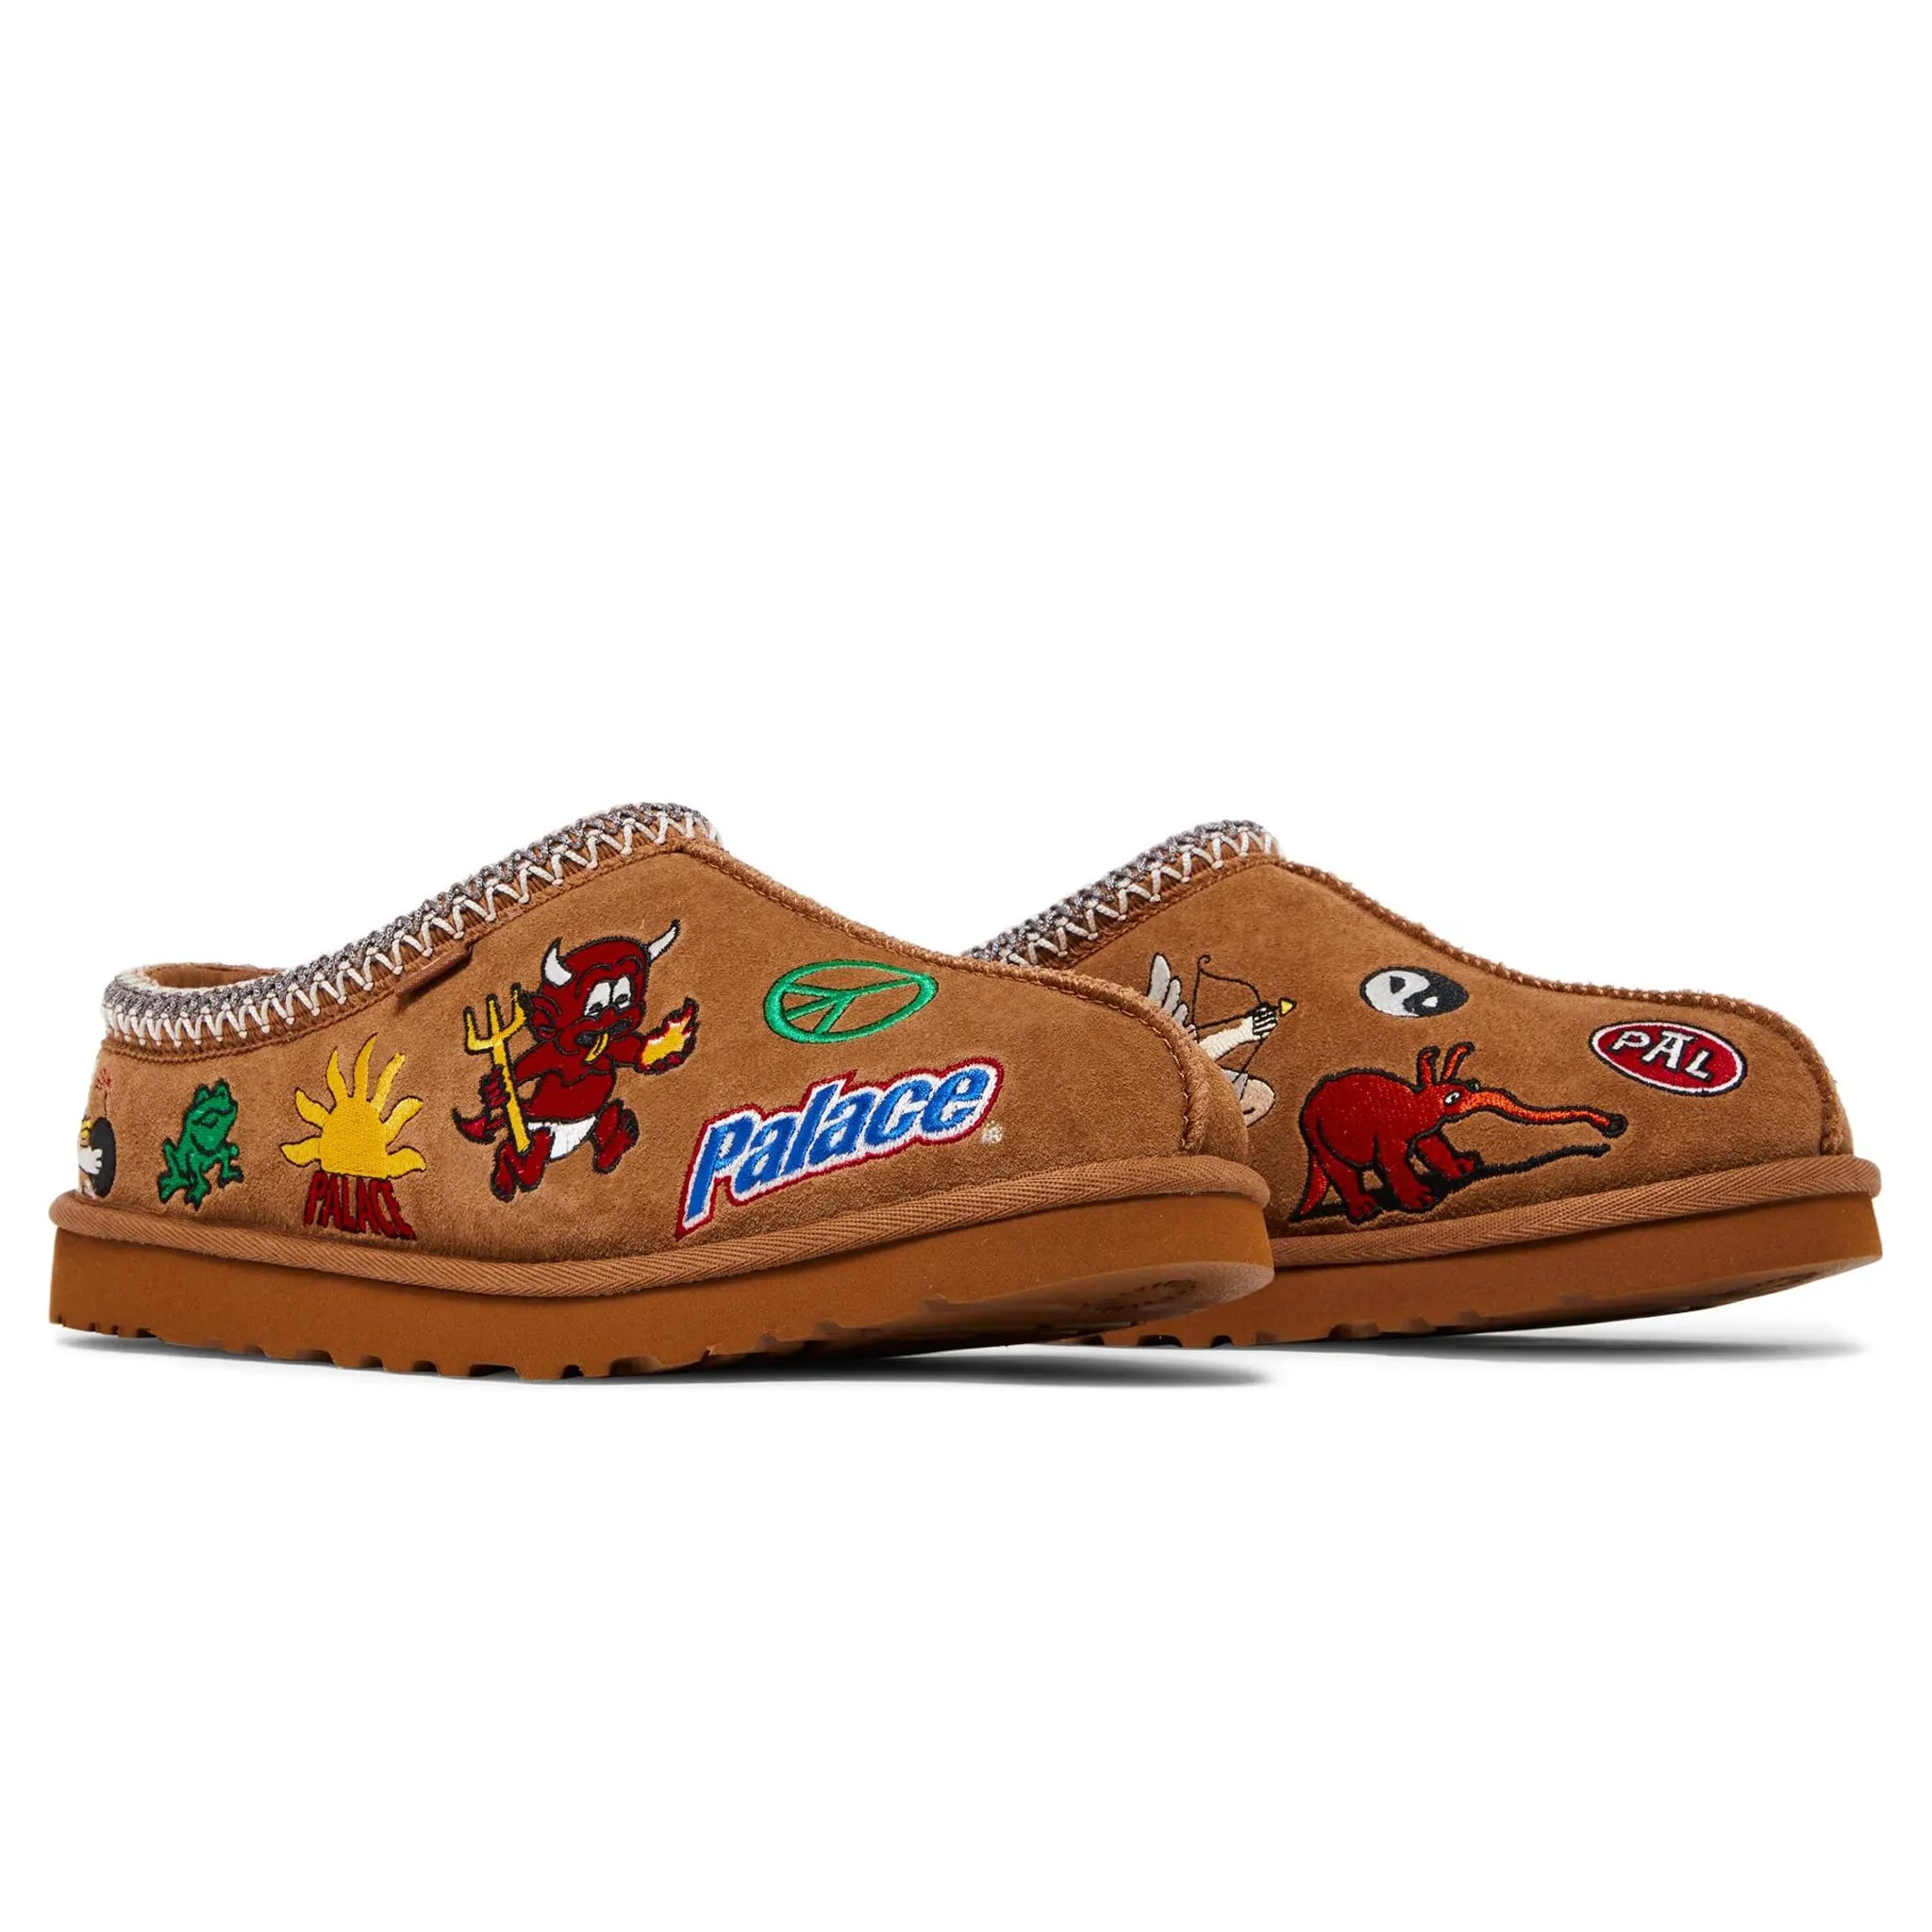 Front side view of Palace x UGG Tasman Chestnut Slippers 1157290-CHE